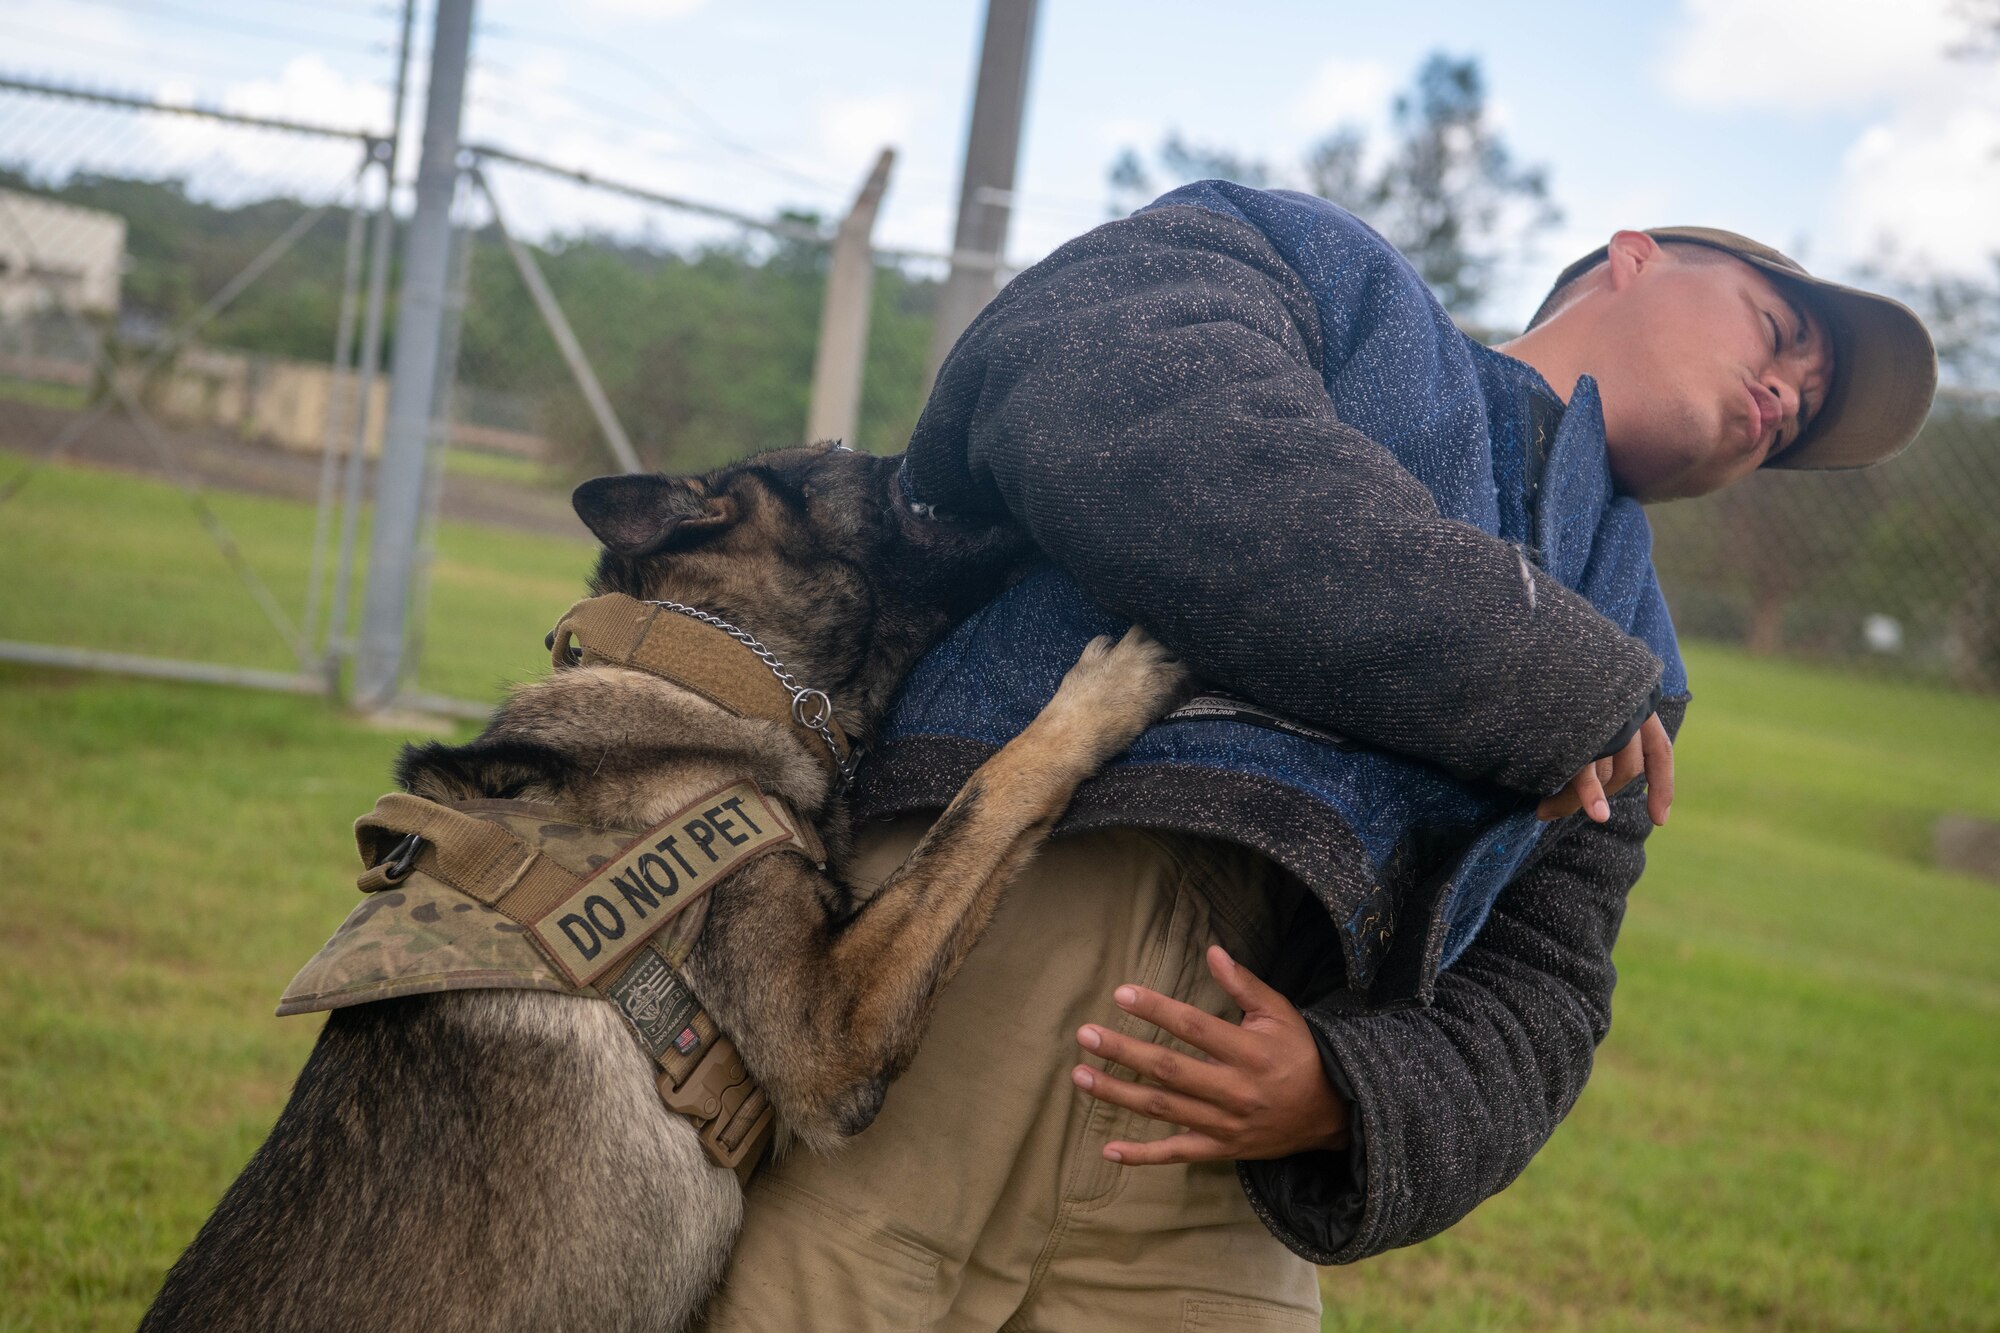 Military working dog bites trainer in bite suit